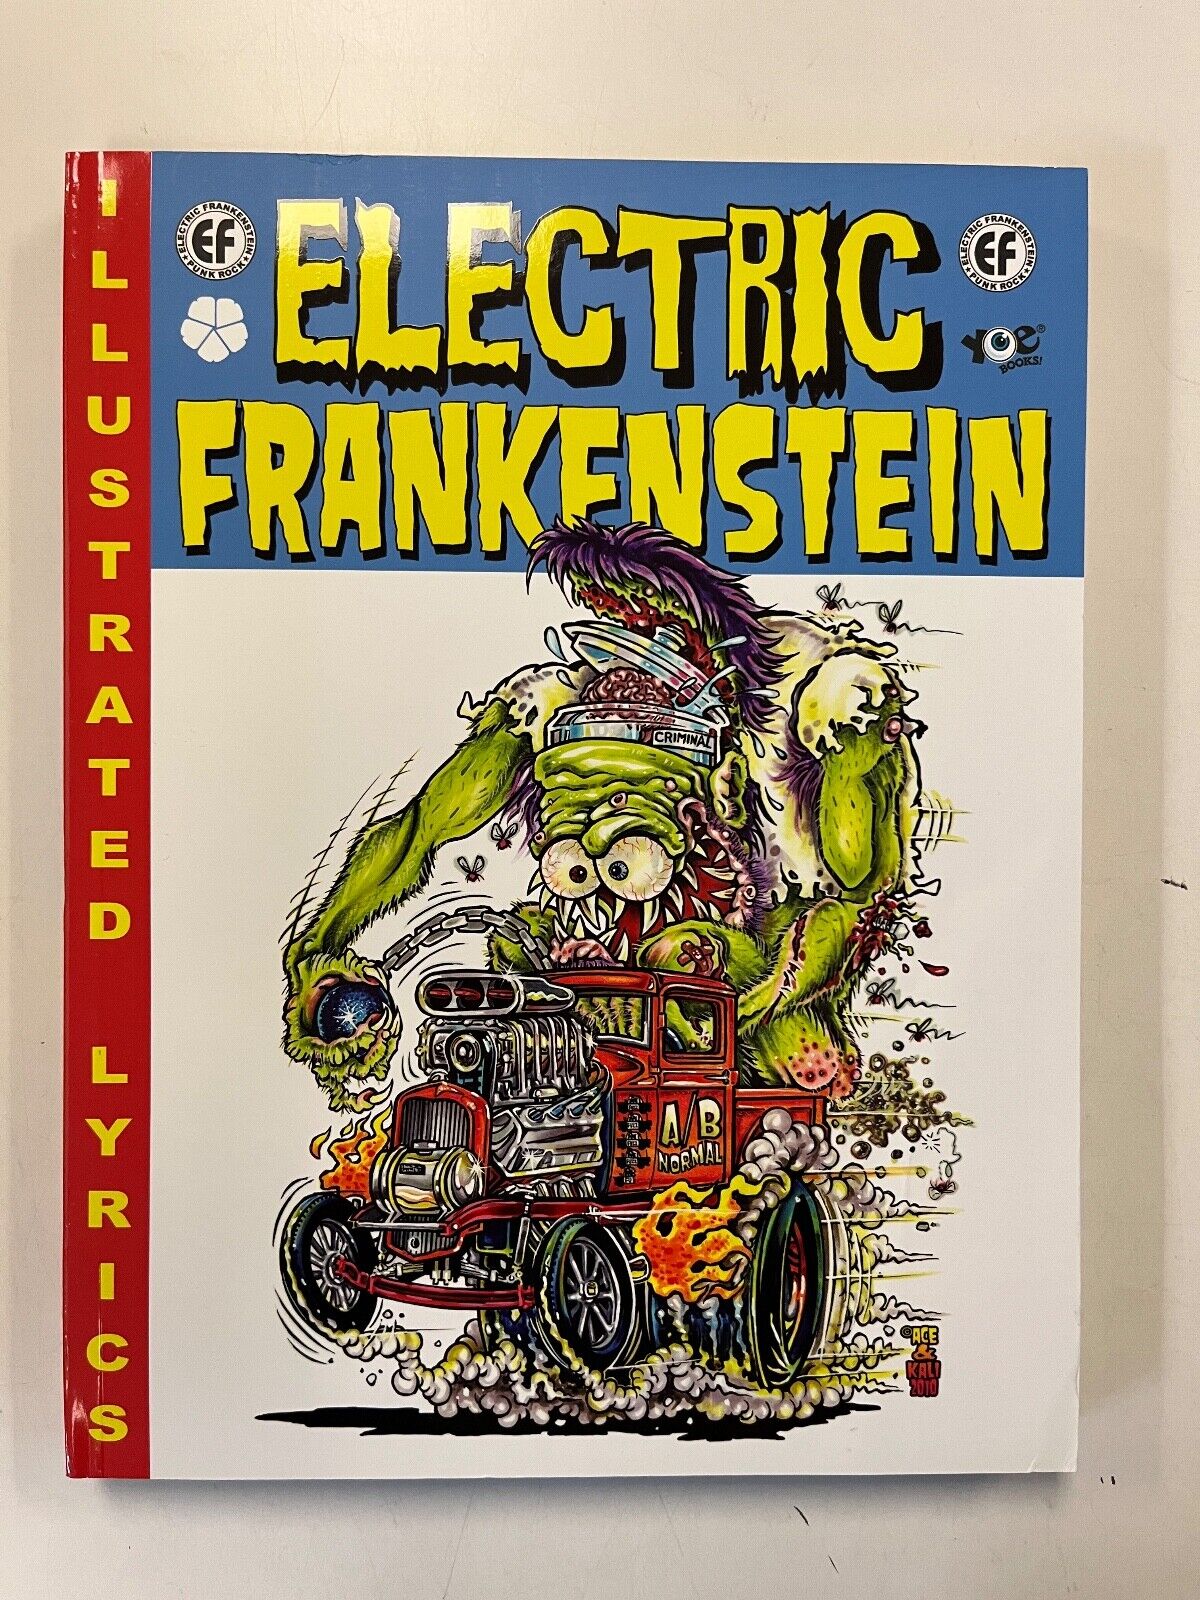 ELECTRIC FRANKENSTEIN: ILLUSTRATED LYRICS TPB *CONDITION - FRONT COVER CREASE*